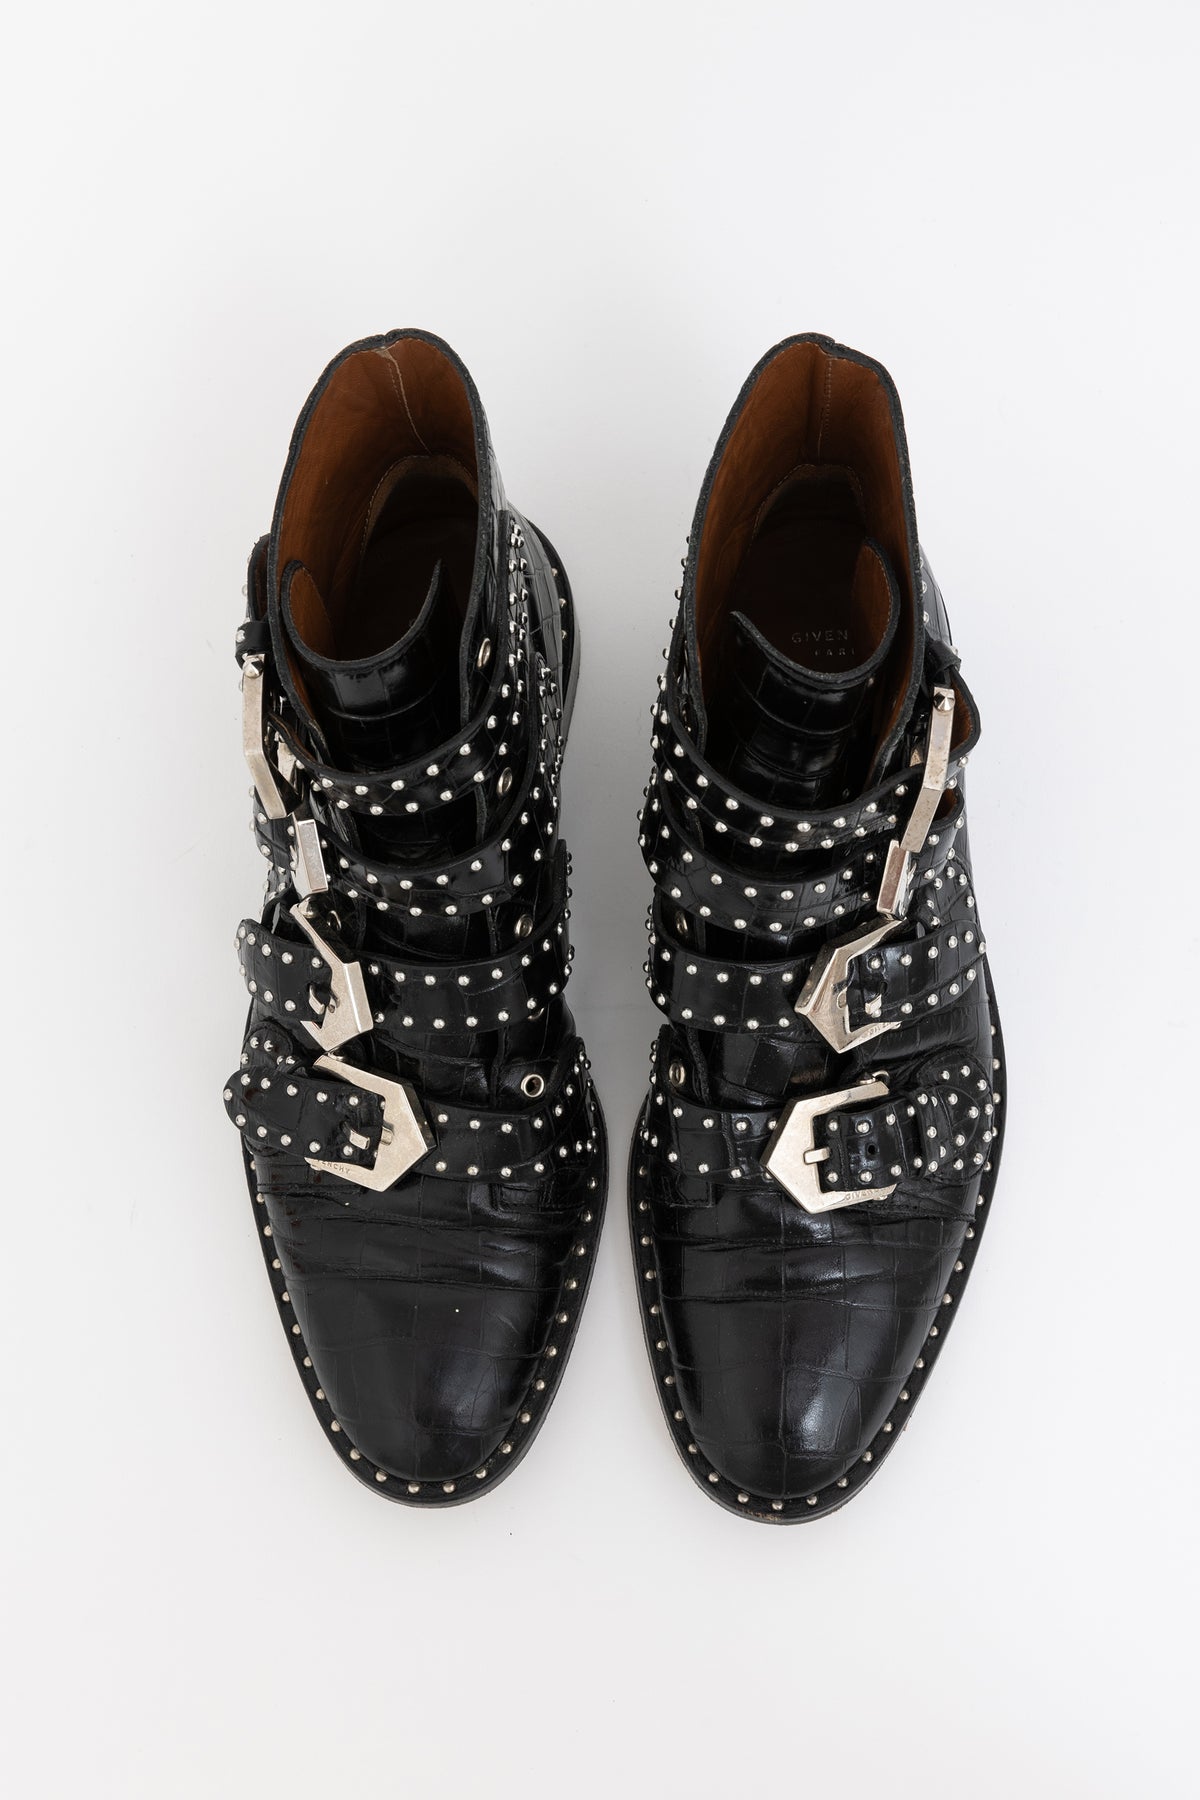 Croc Embossed Studded Boots